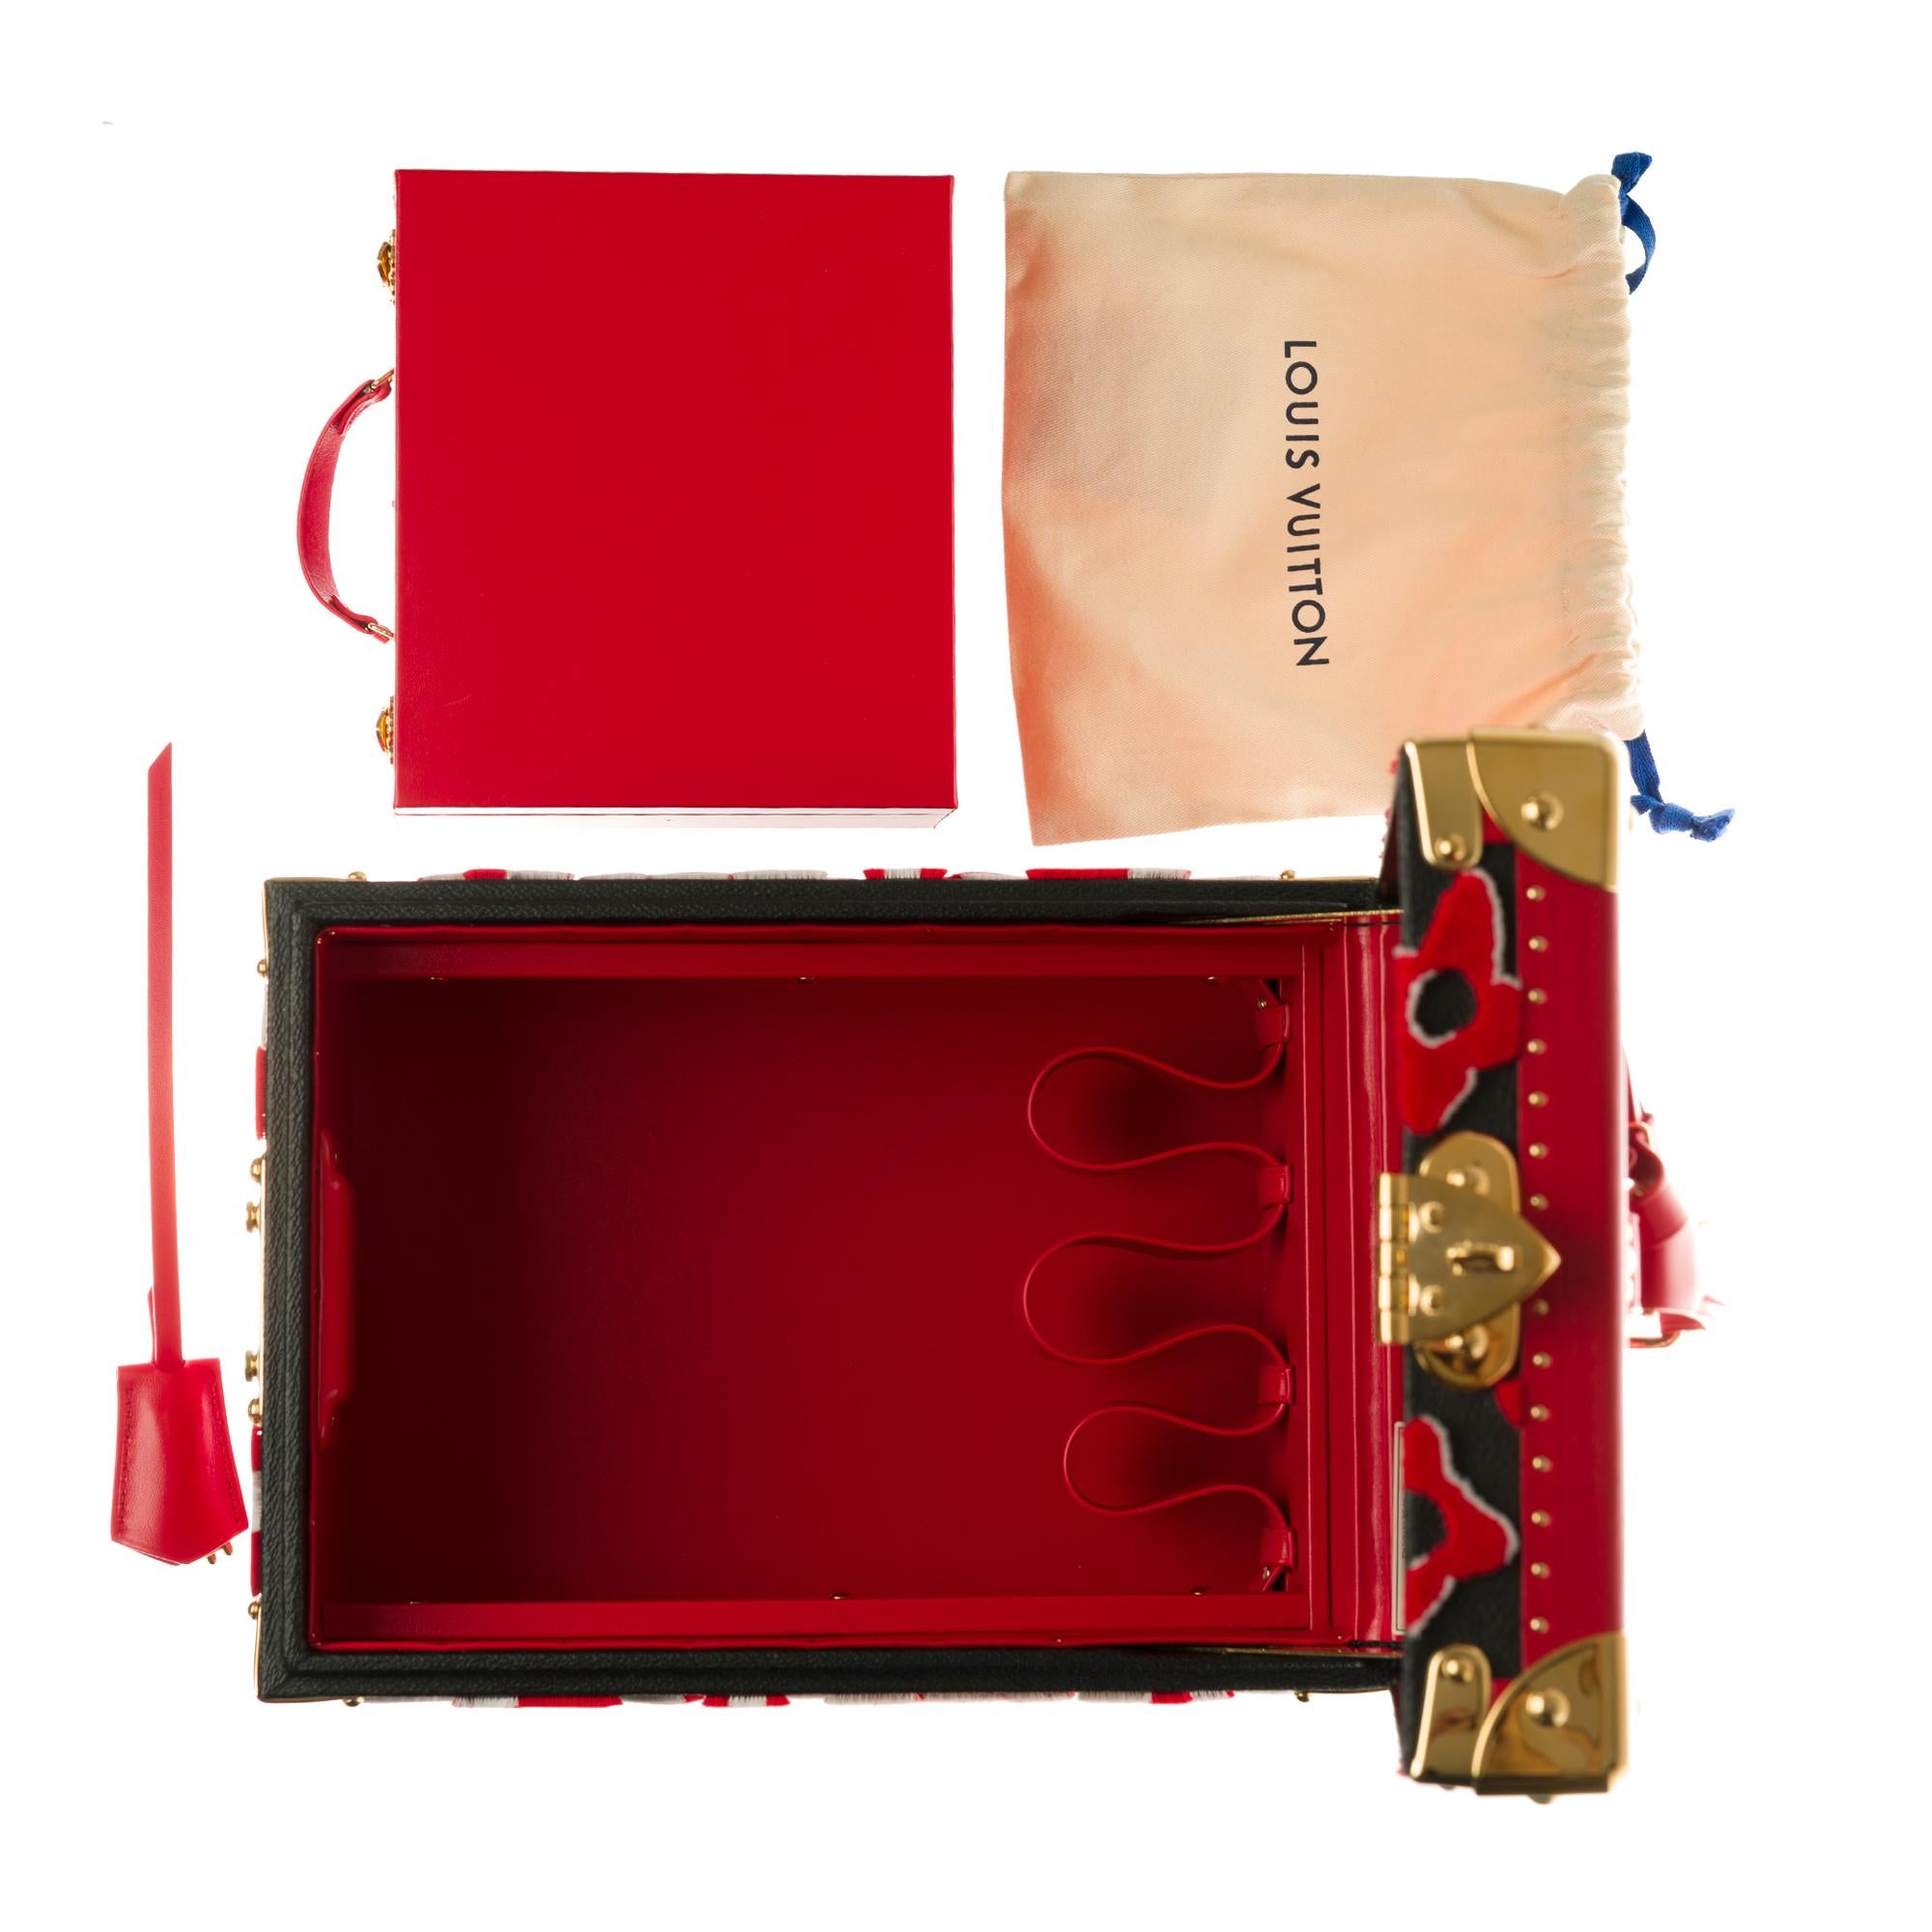 Ultra limited/Few pieces in the world/Louis Vuitton Vanity Case in red Tufa 3